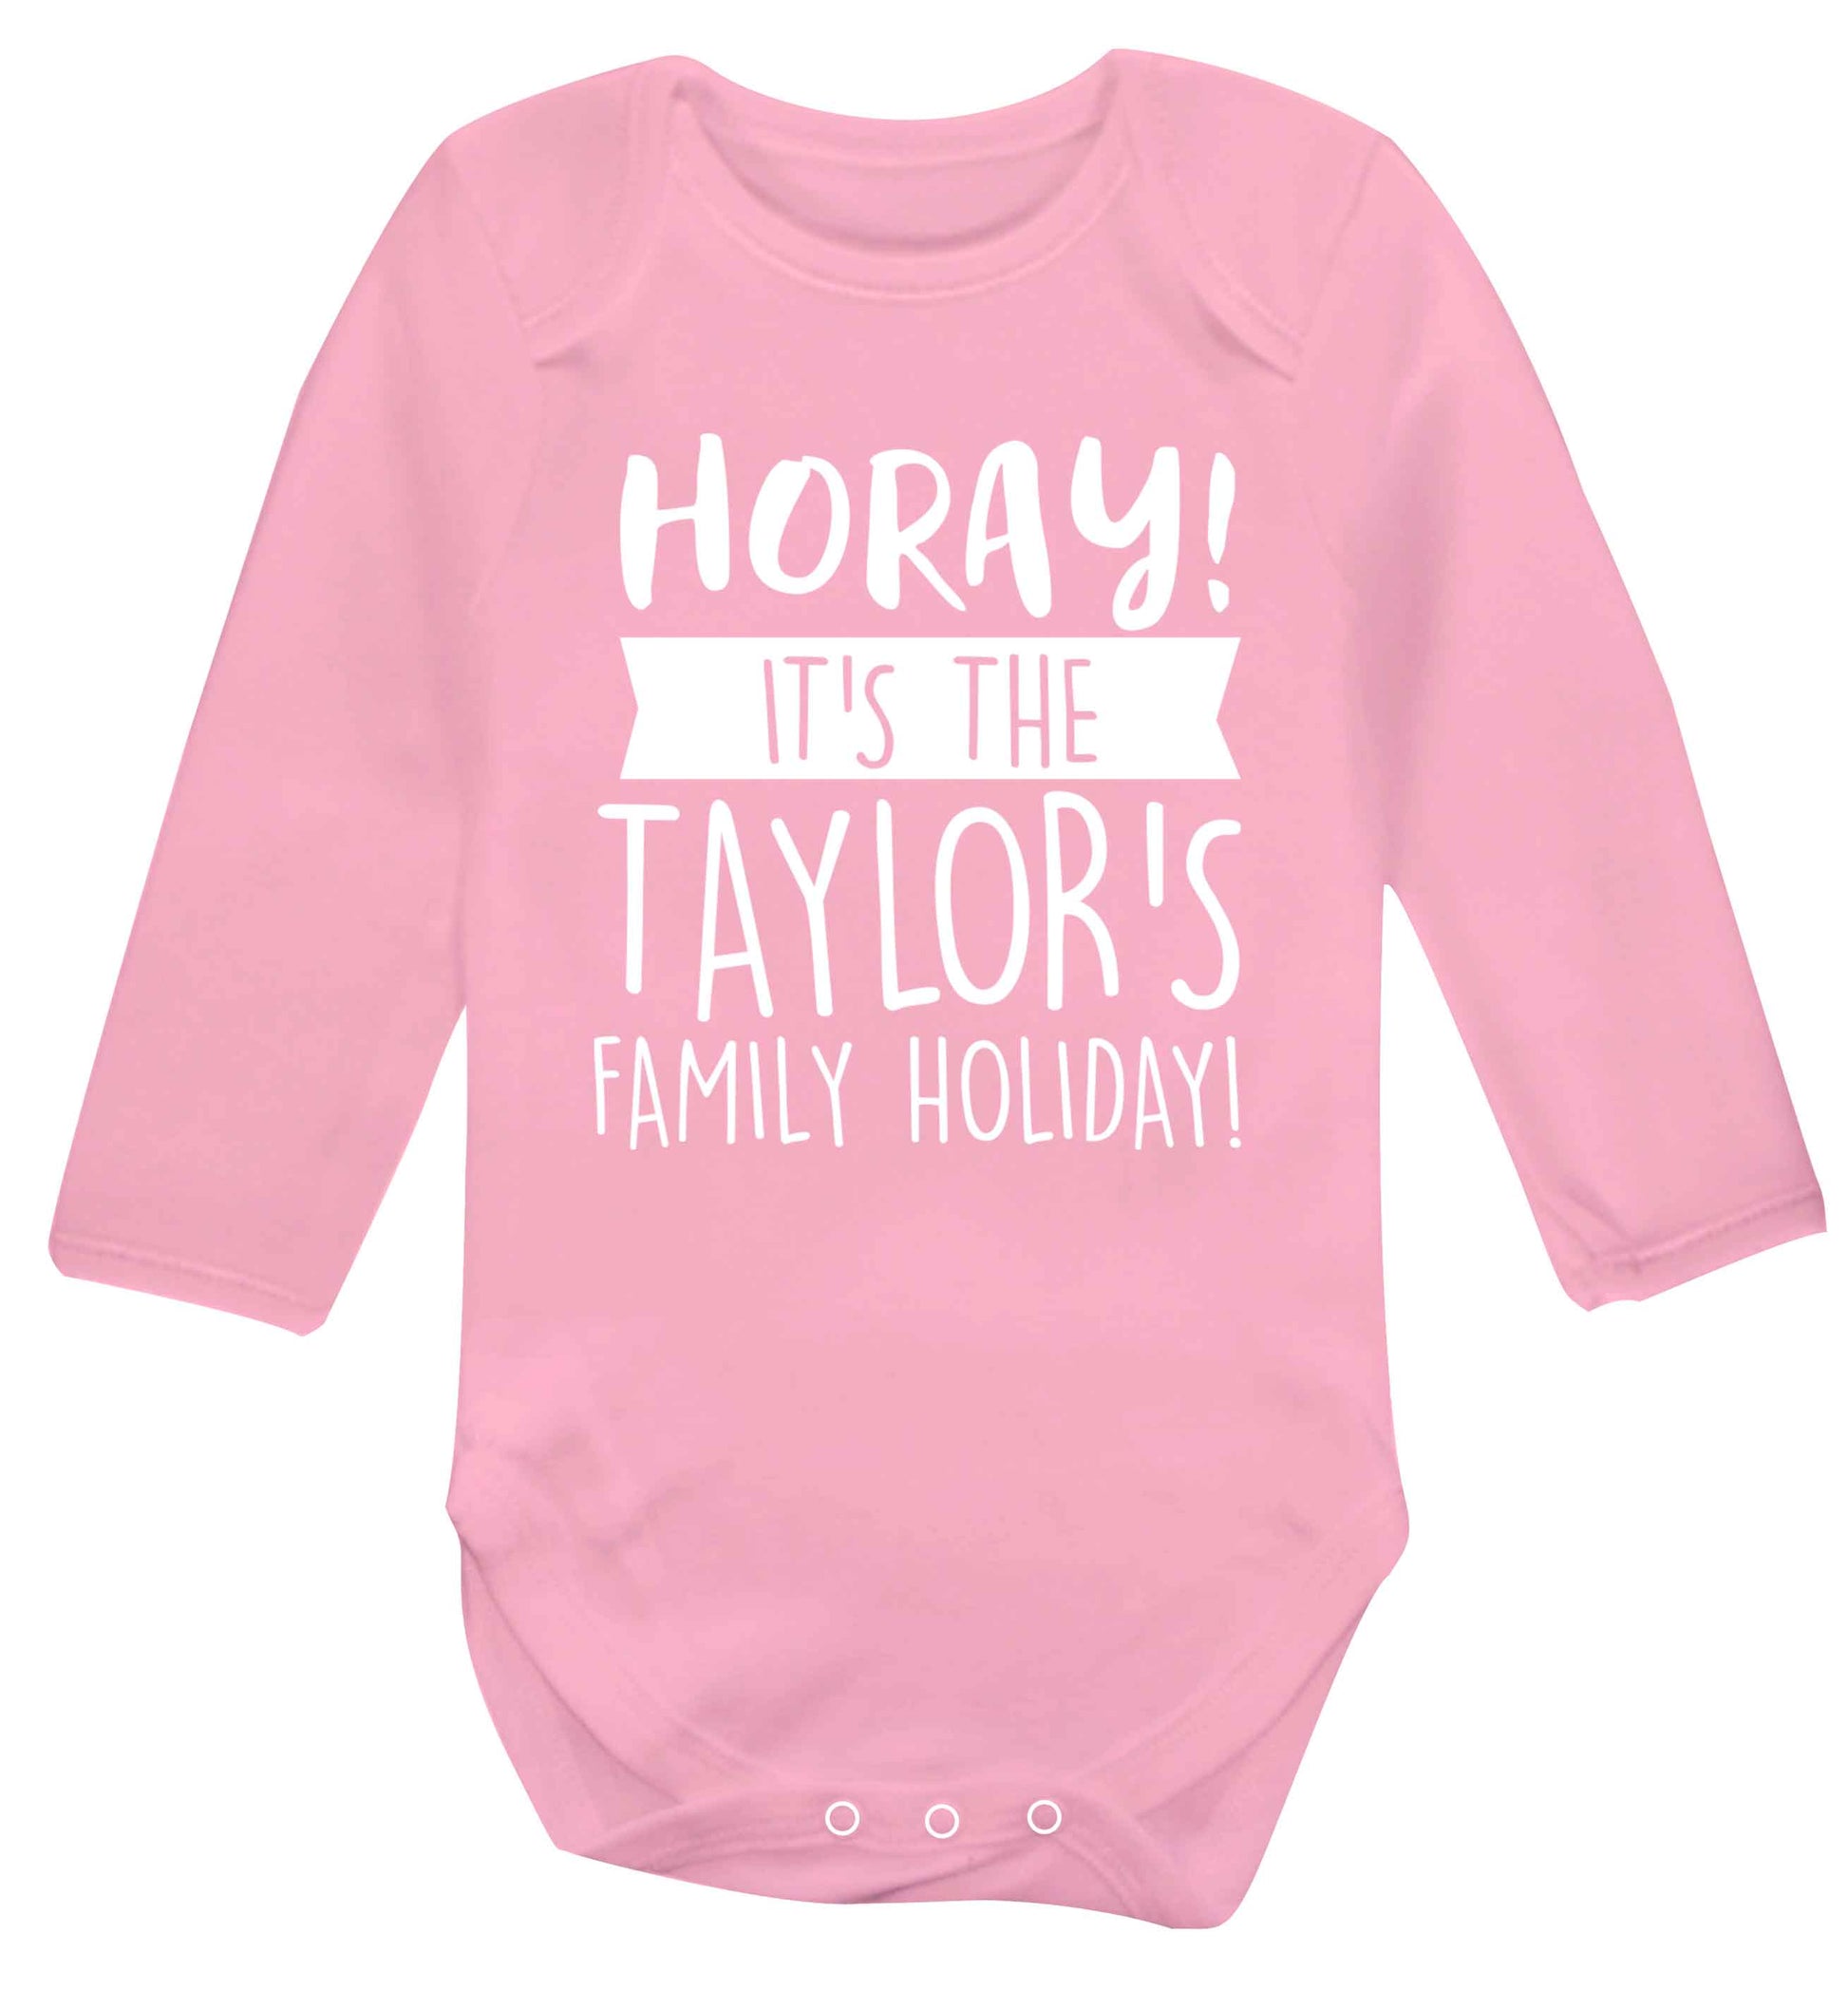 Horay it's the Taylor's family holiday! personalised item Baby Vest long sleeved pale pink 6-12 months